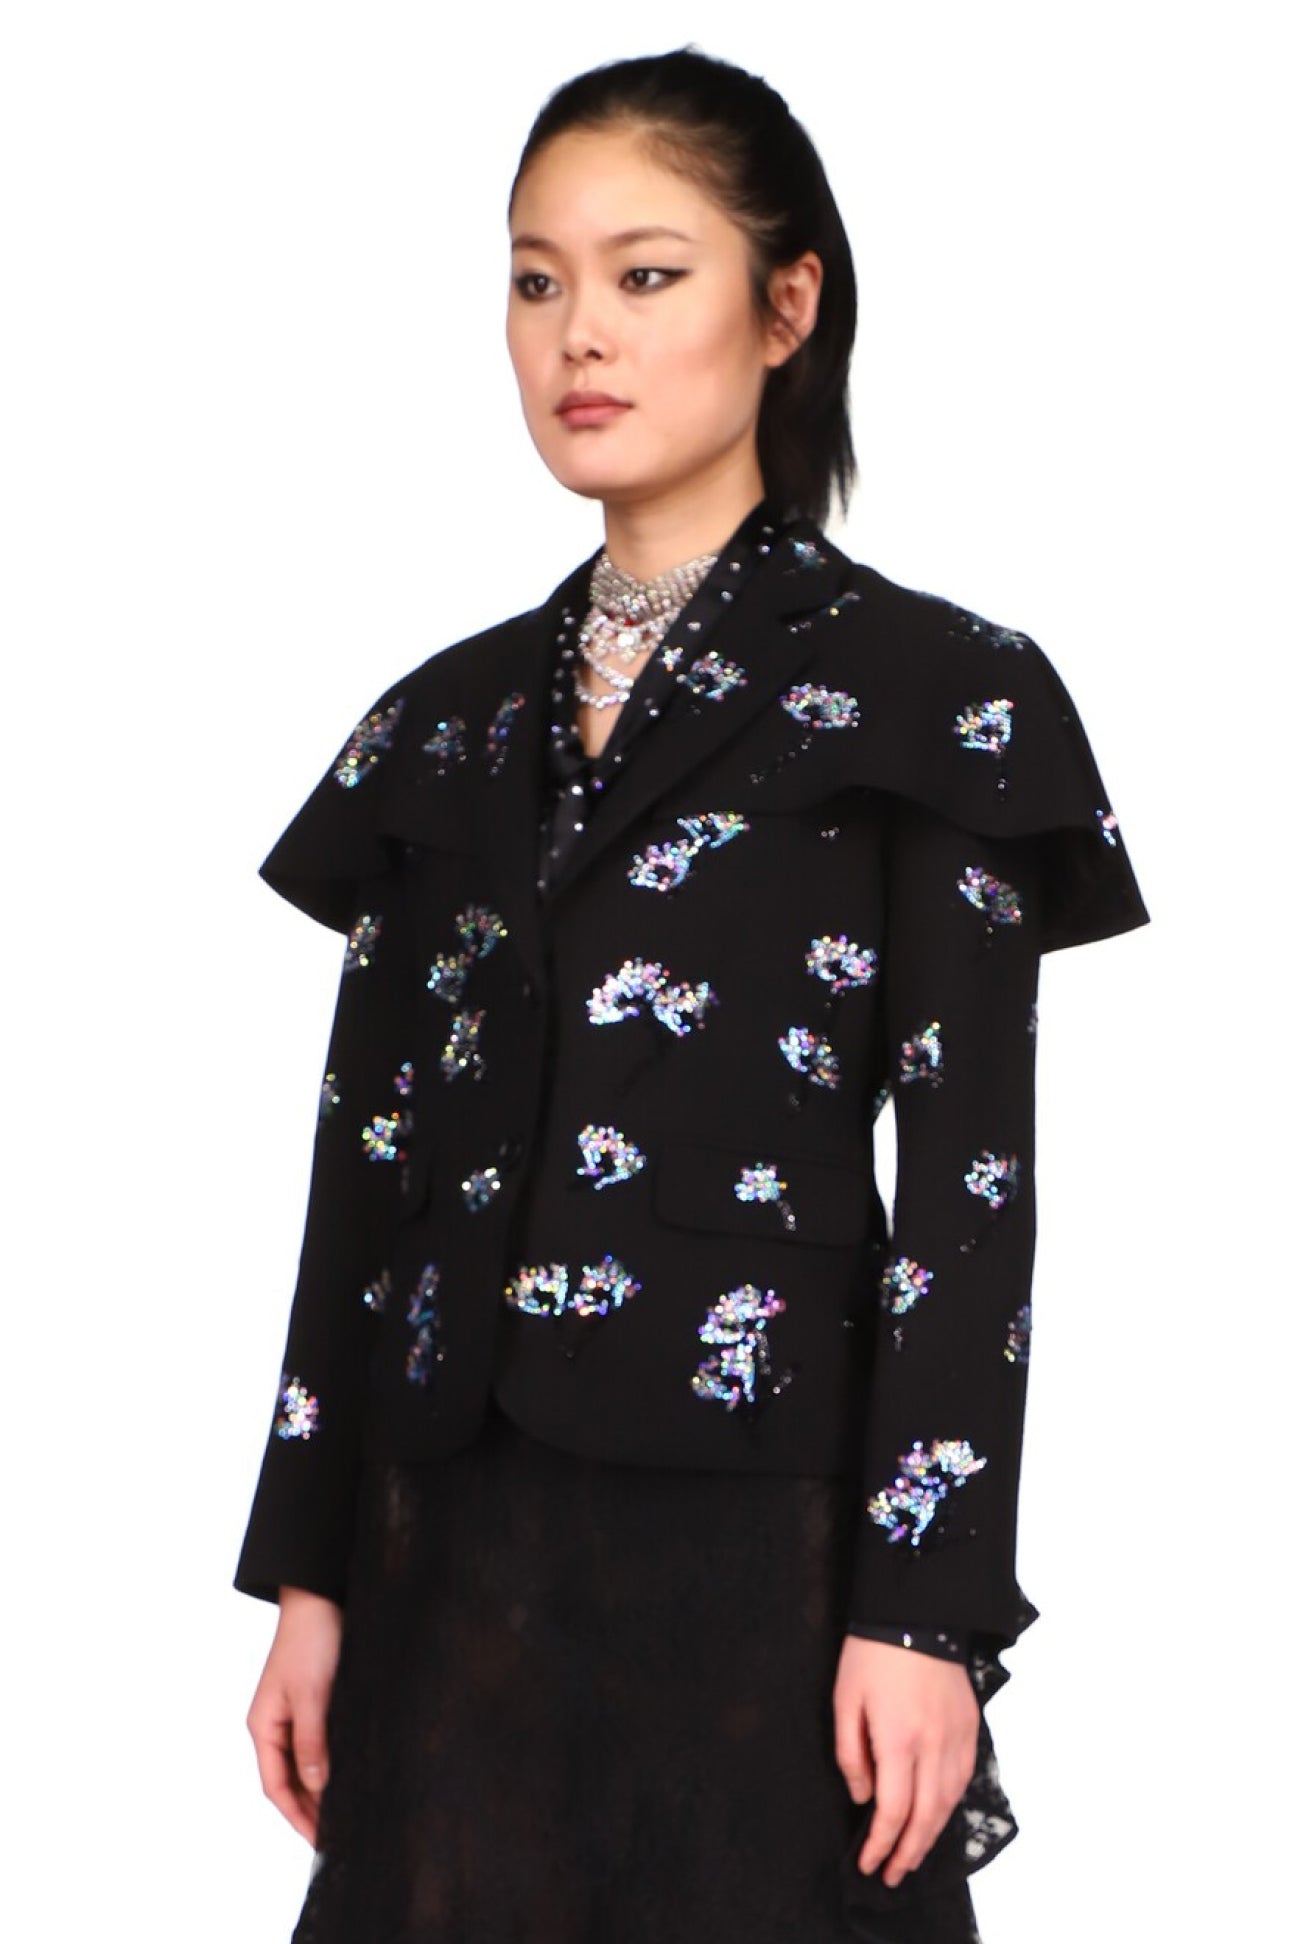 CRYSTAL 'FORGET ME NOT' CAPED JACKET - BLAZERS - Libertine